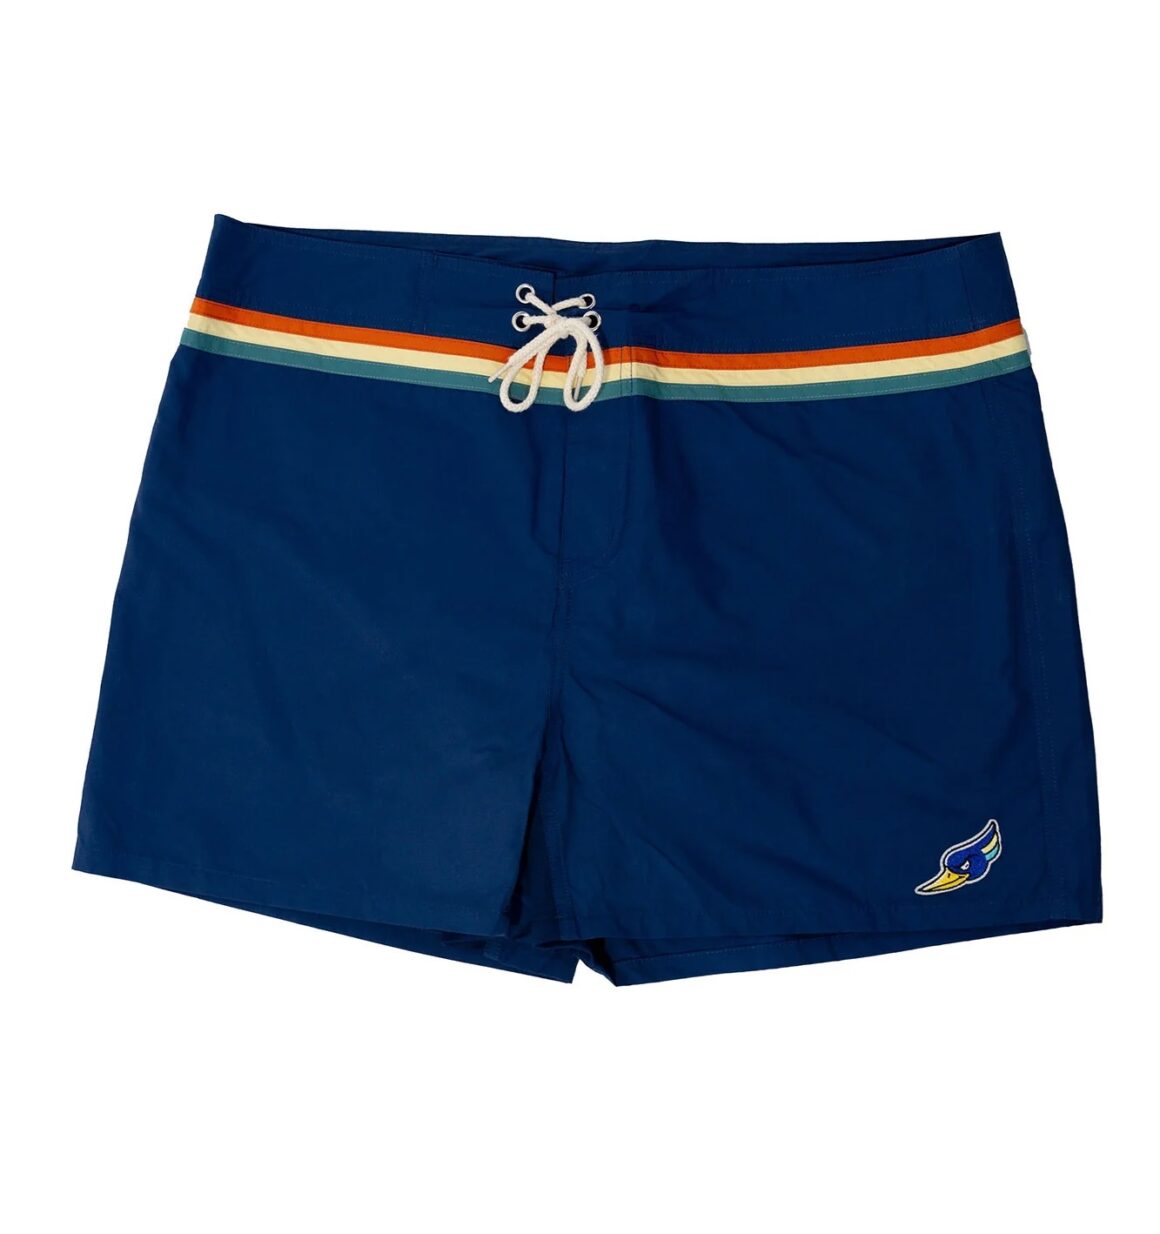 Woodpecker Swim Short Navy Whats in our carts Gents Post